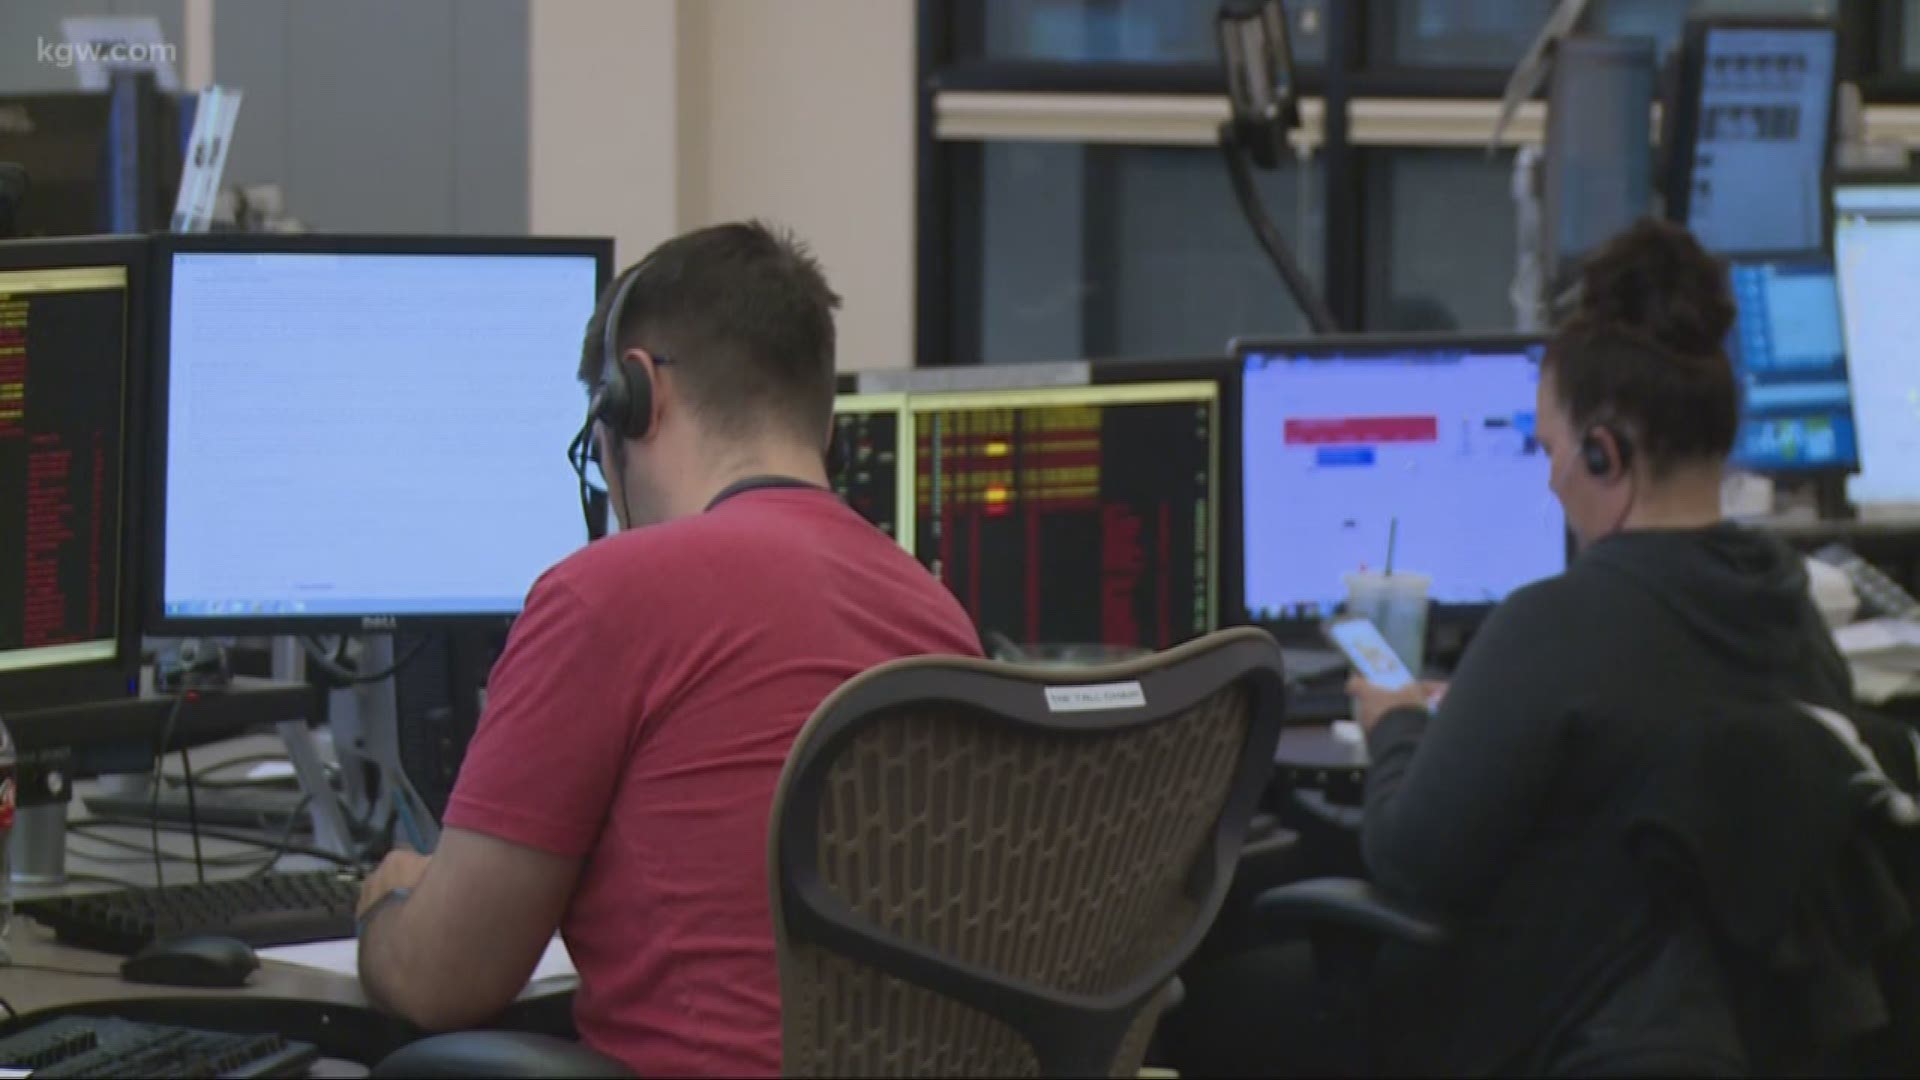 Dispatchers have been inundated with calls, some hostile and abusive, over the violent assaults that happened last weekend when left- and right-wing groups met in downtown Portland.